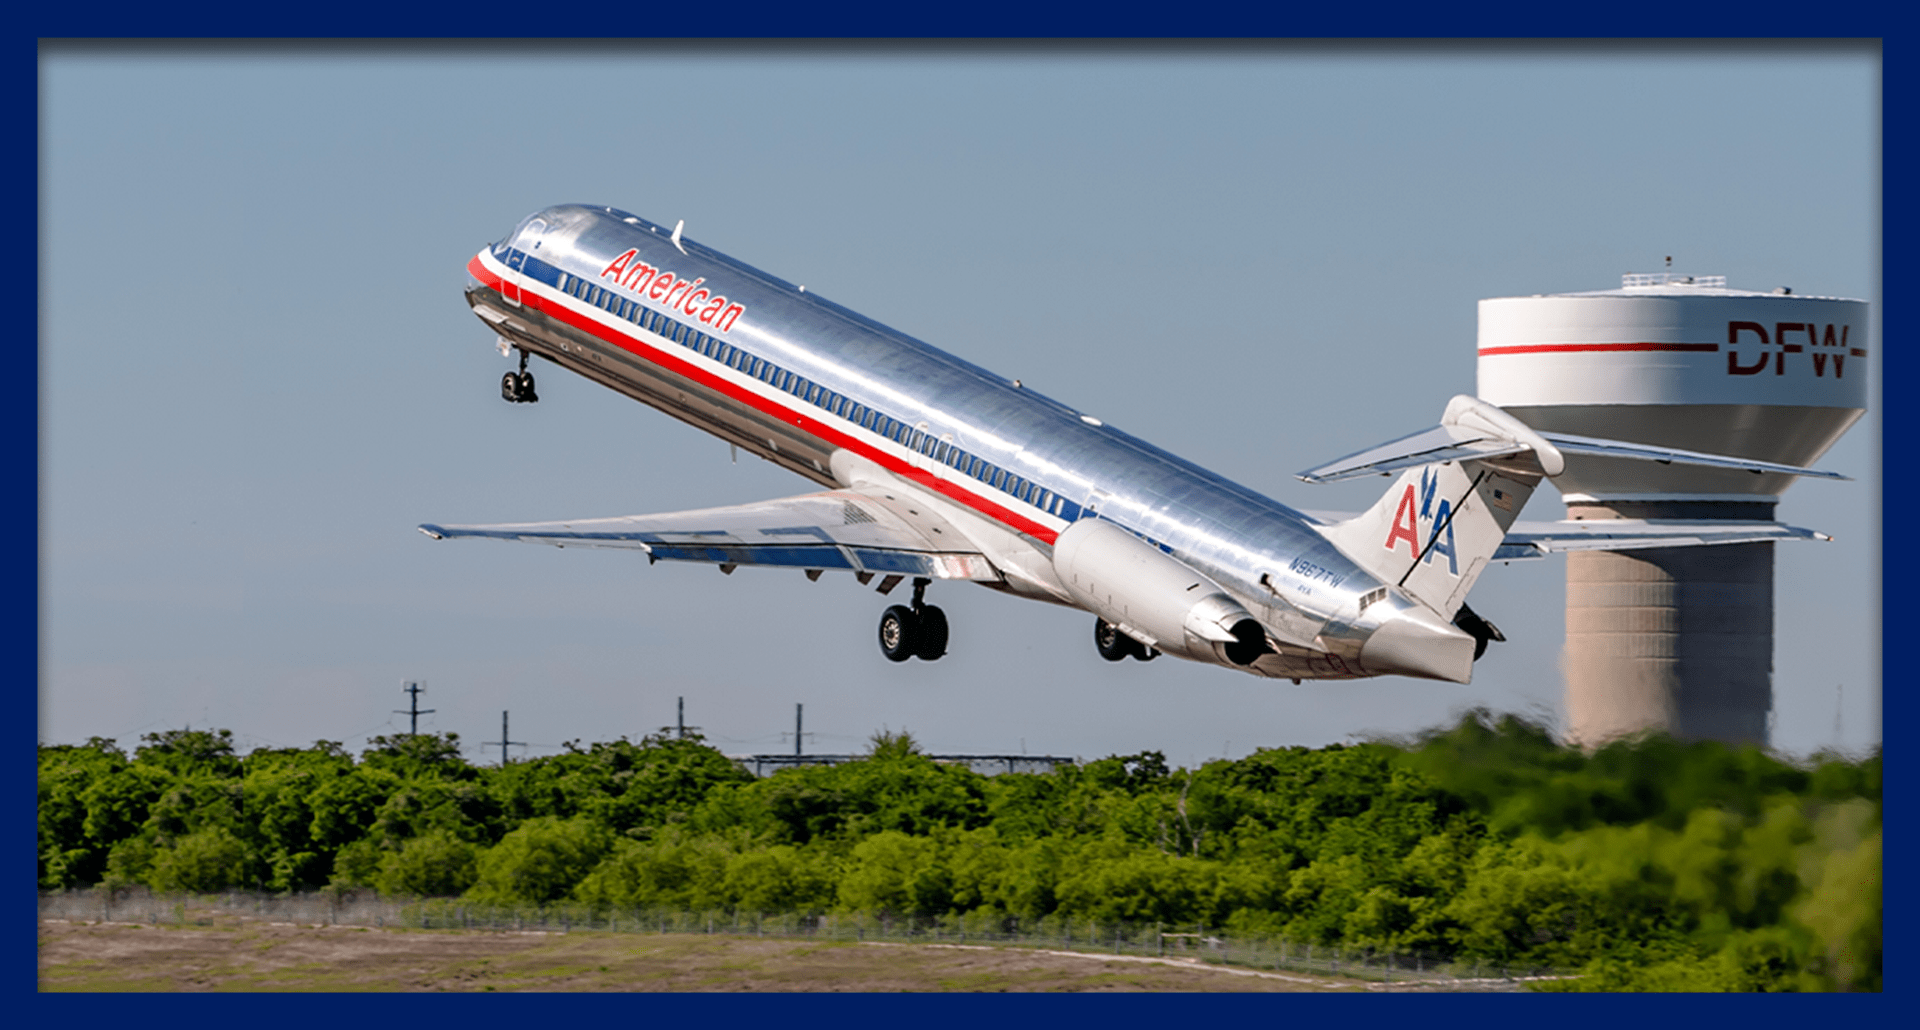 In the News: A Retro Addition to American Airlines' Online Brand Store